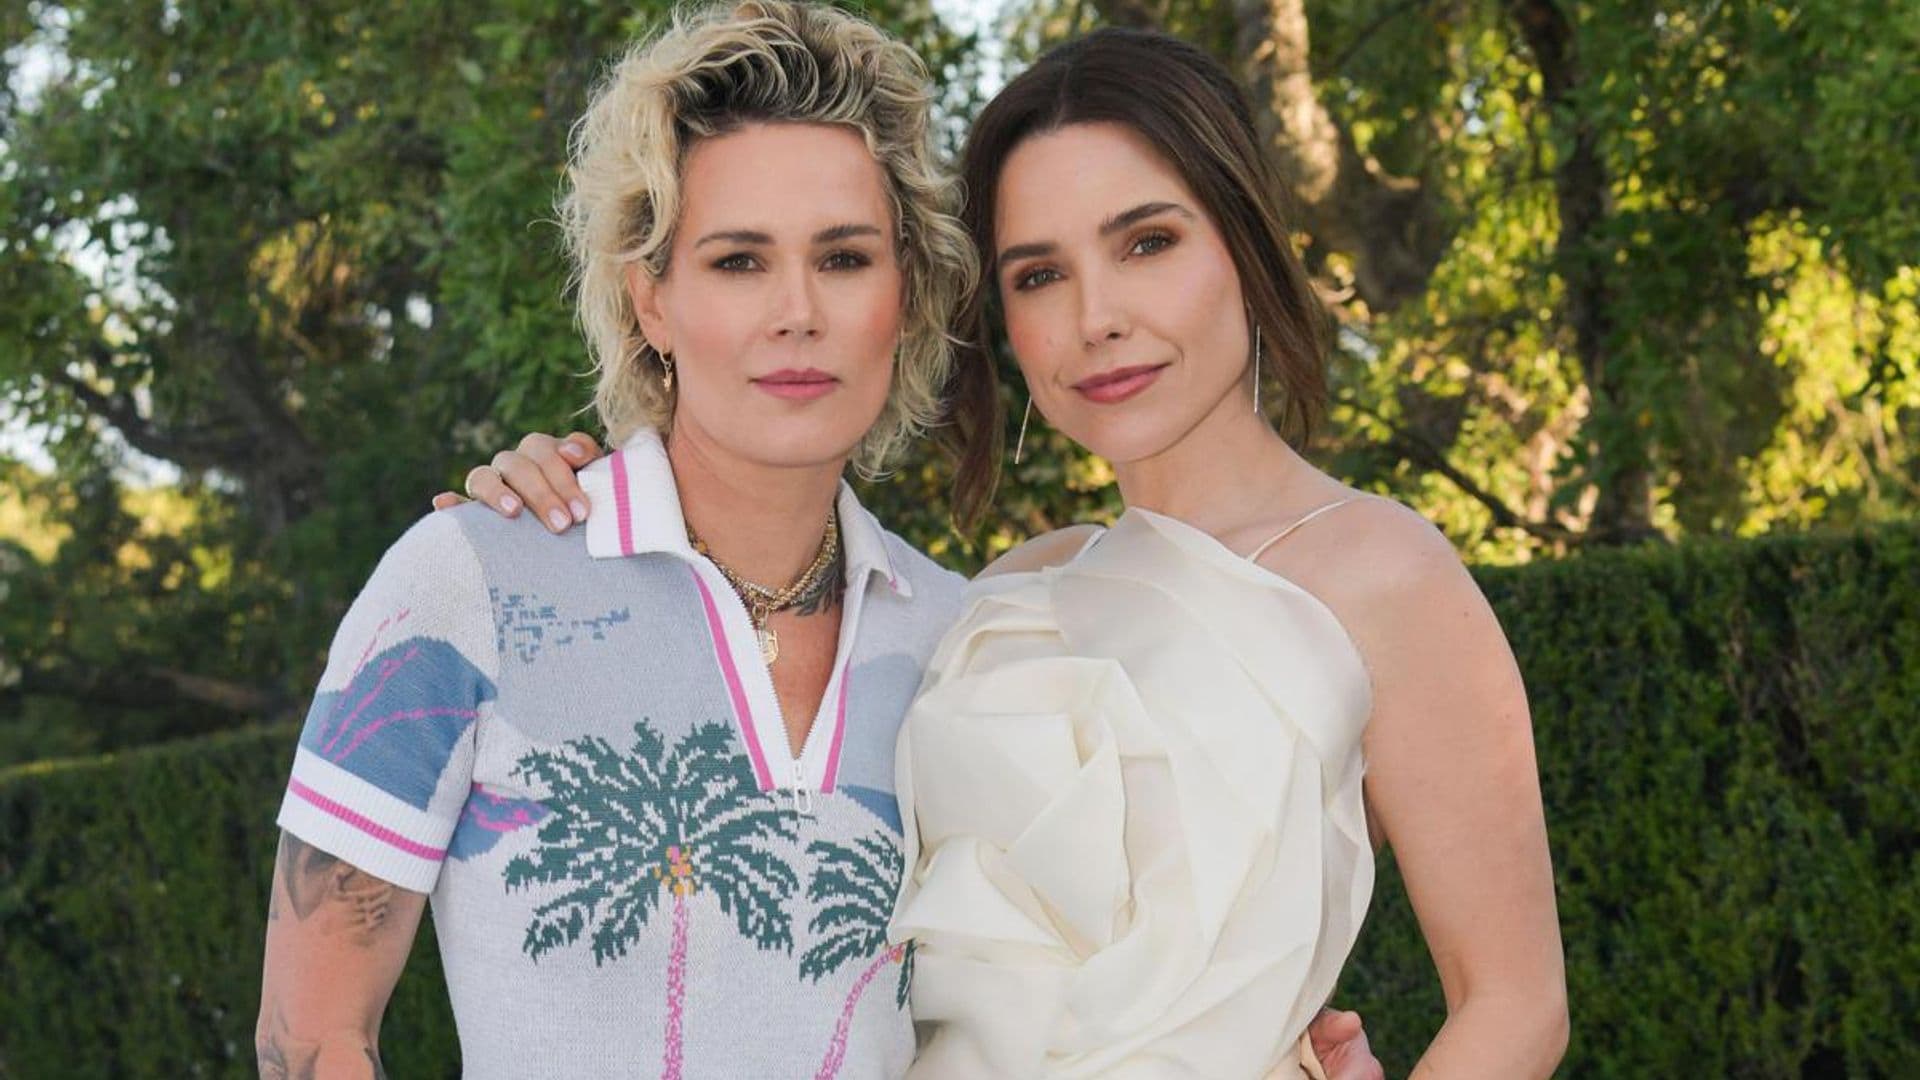 Sophia Bush and Ashlyn Harris look gorgeous and happy in Cannes Lion